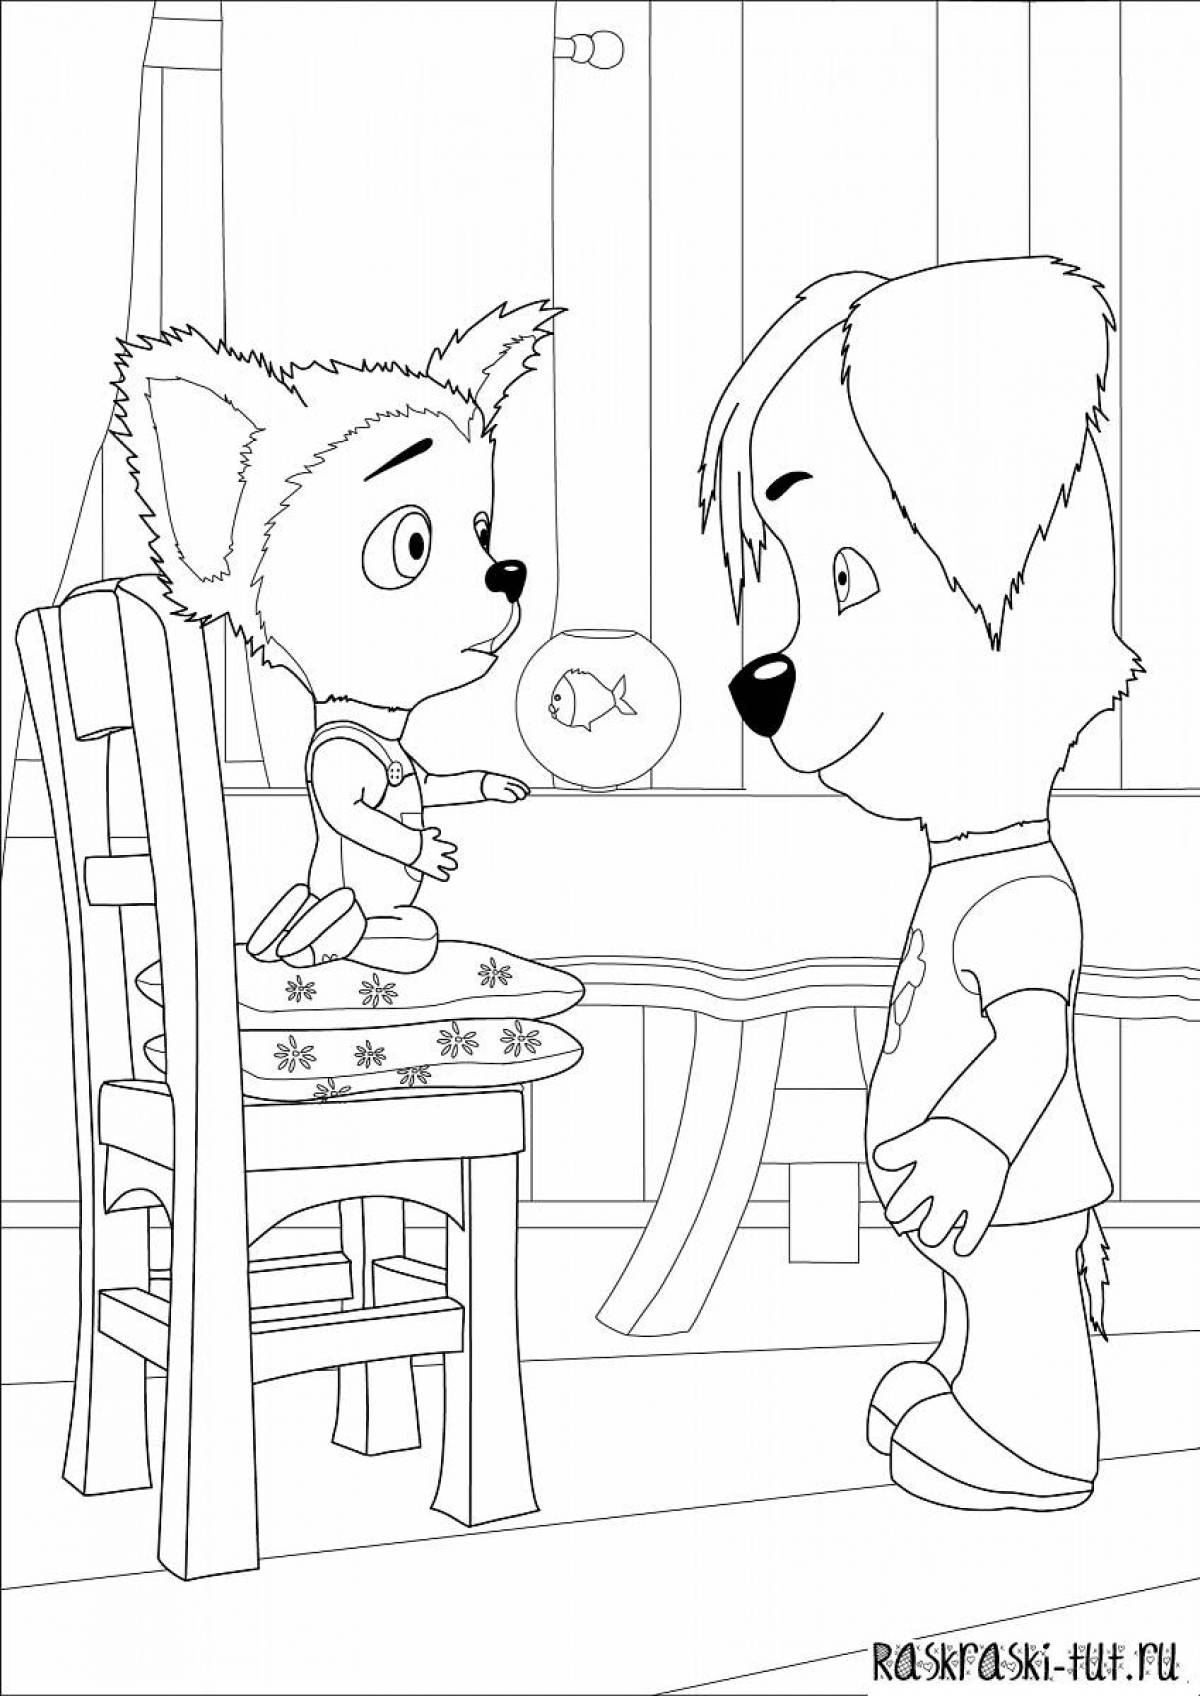 Bright barboskin coloring pages for kids